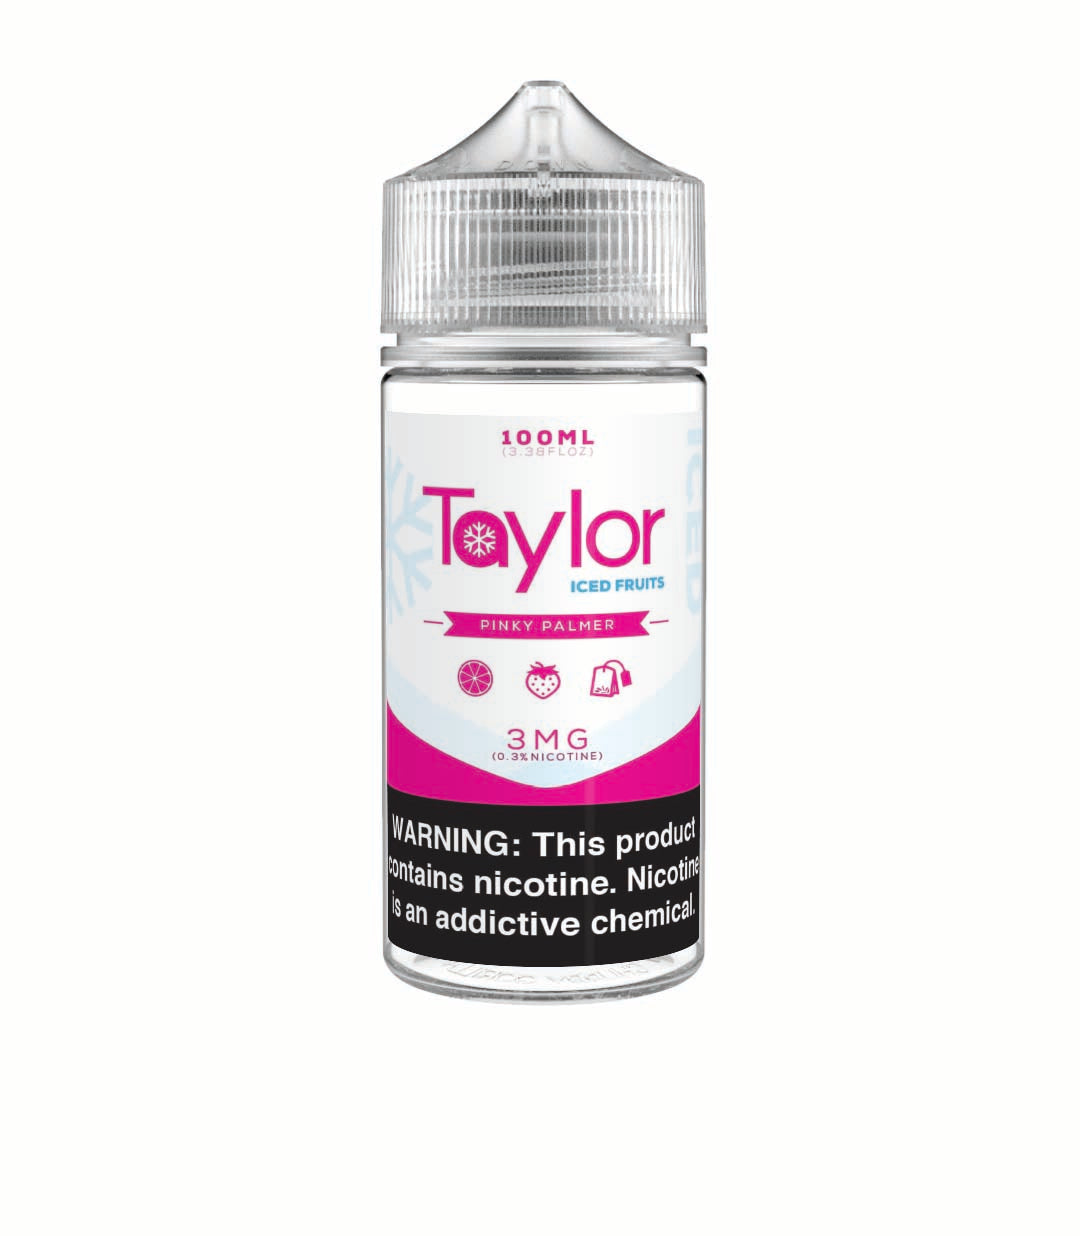 Taylor Flavors: Pinky Palmer Iced